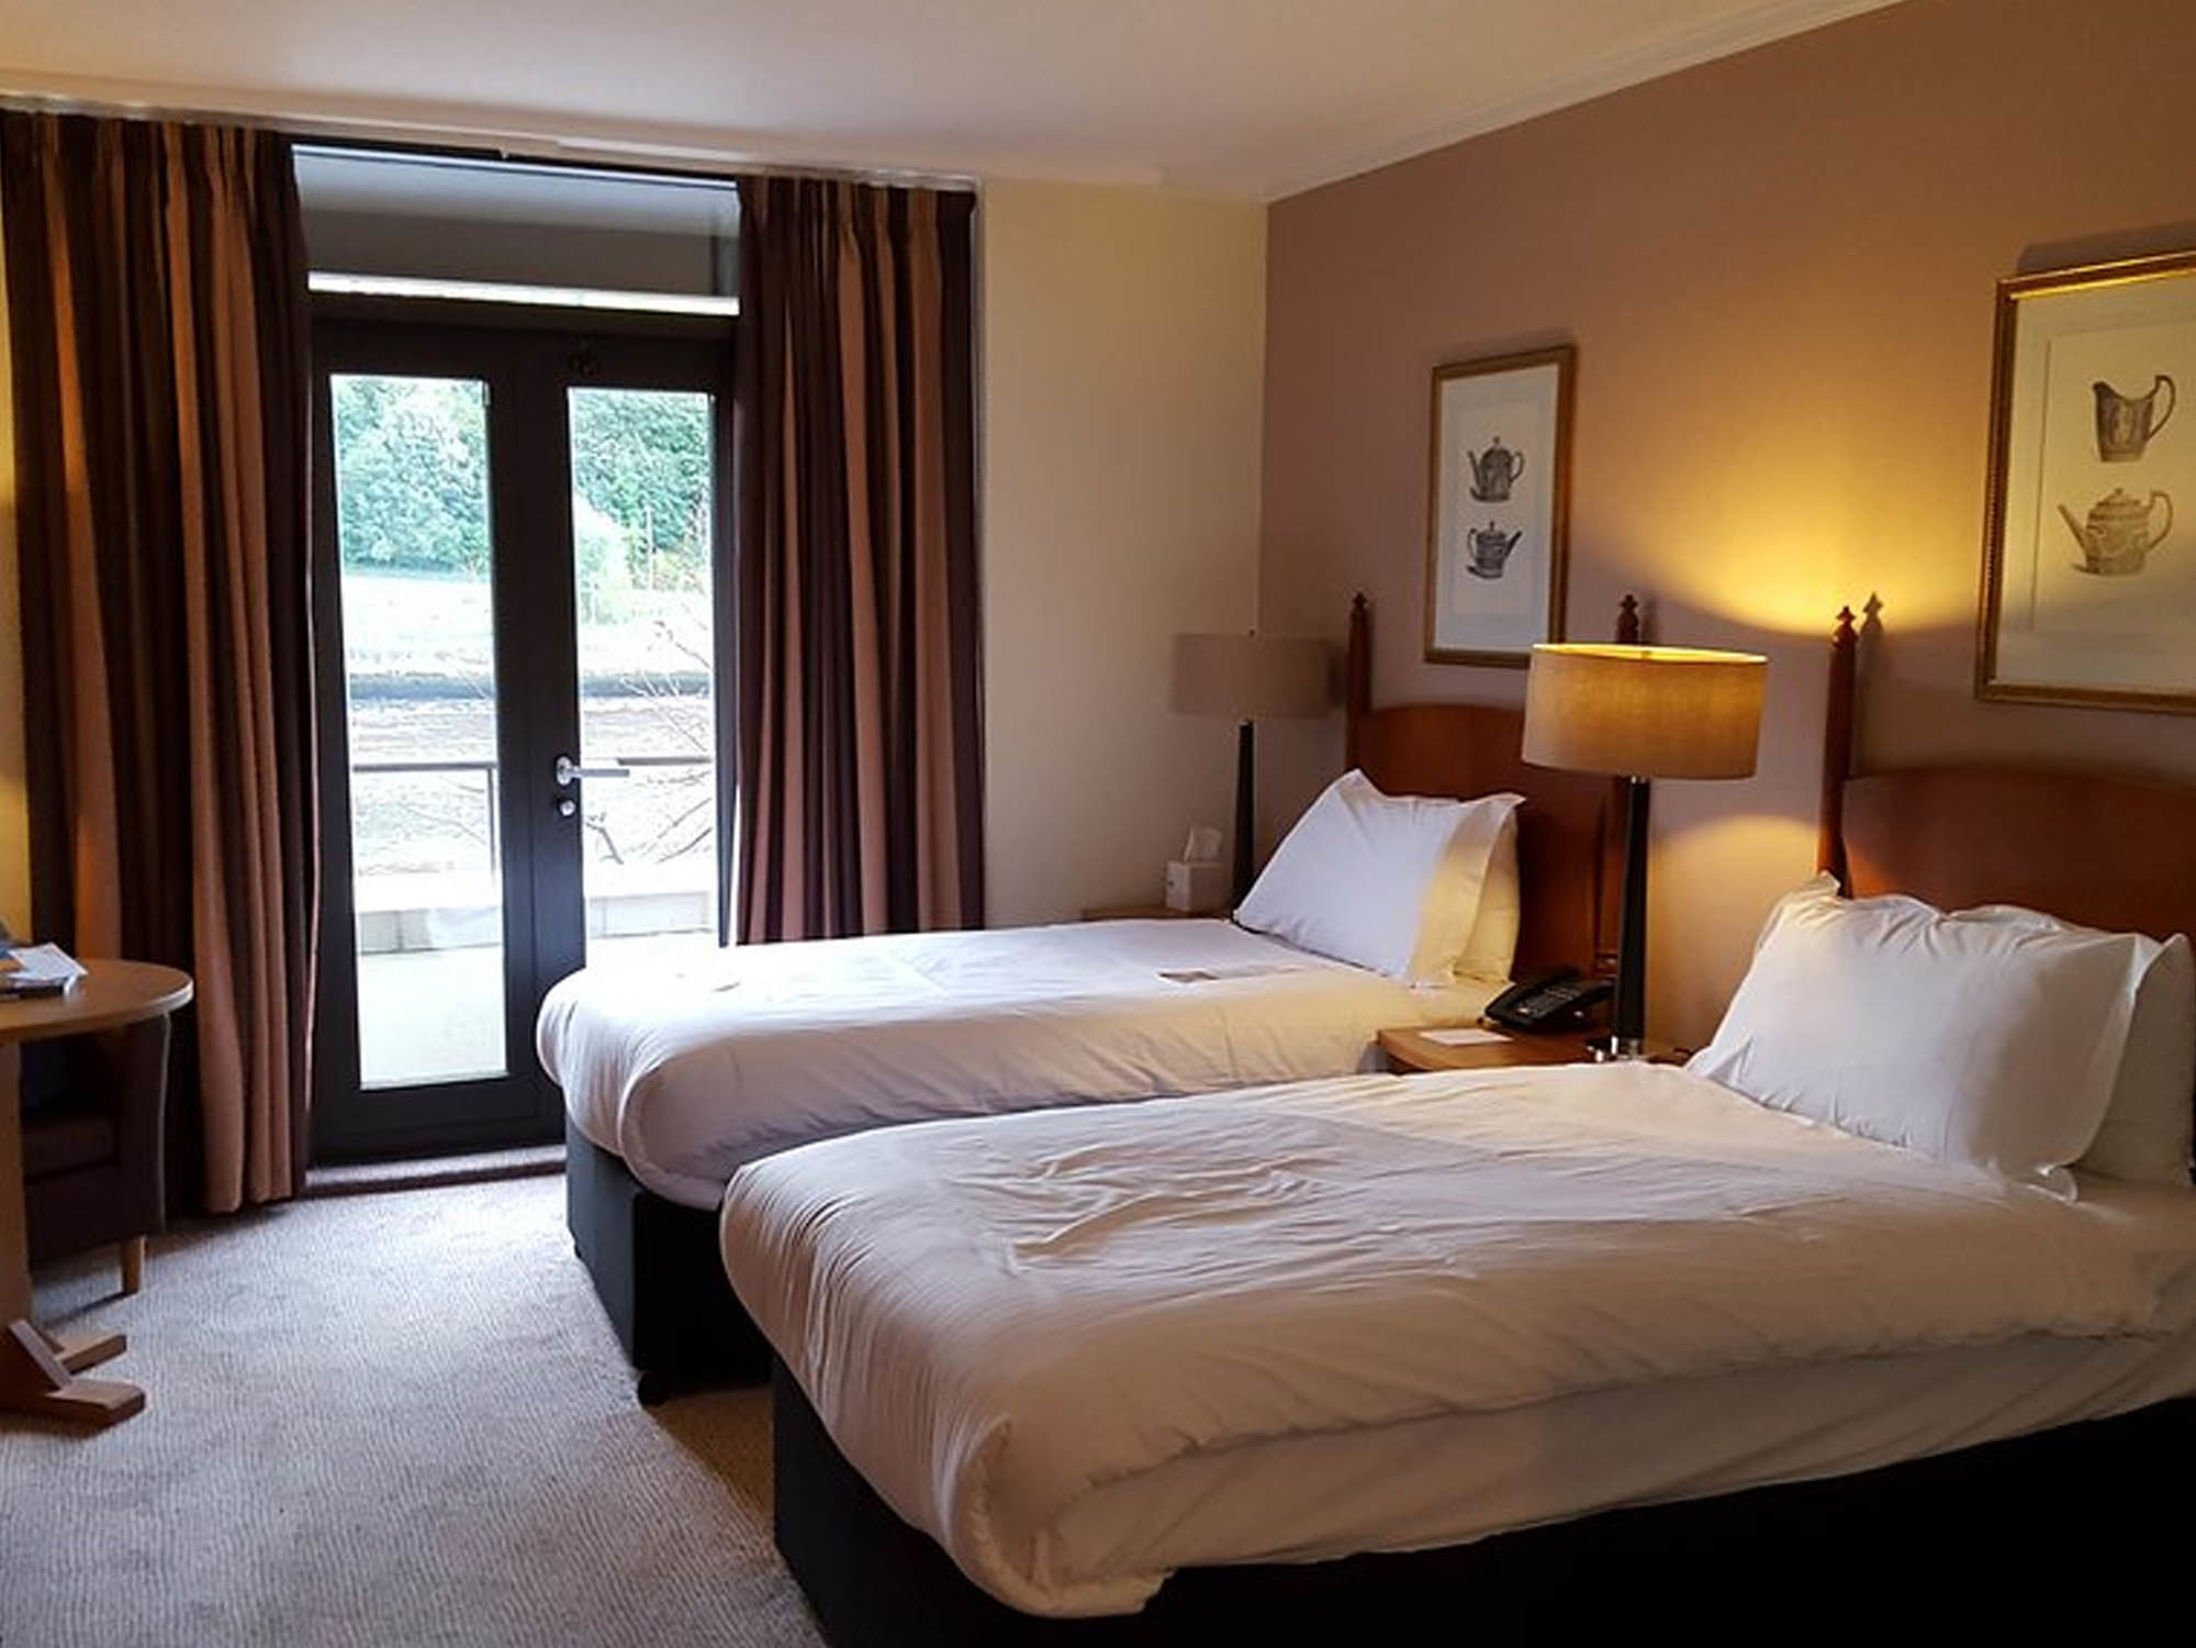 Best Hotels in Newcastle - Copthorne Hotel